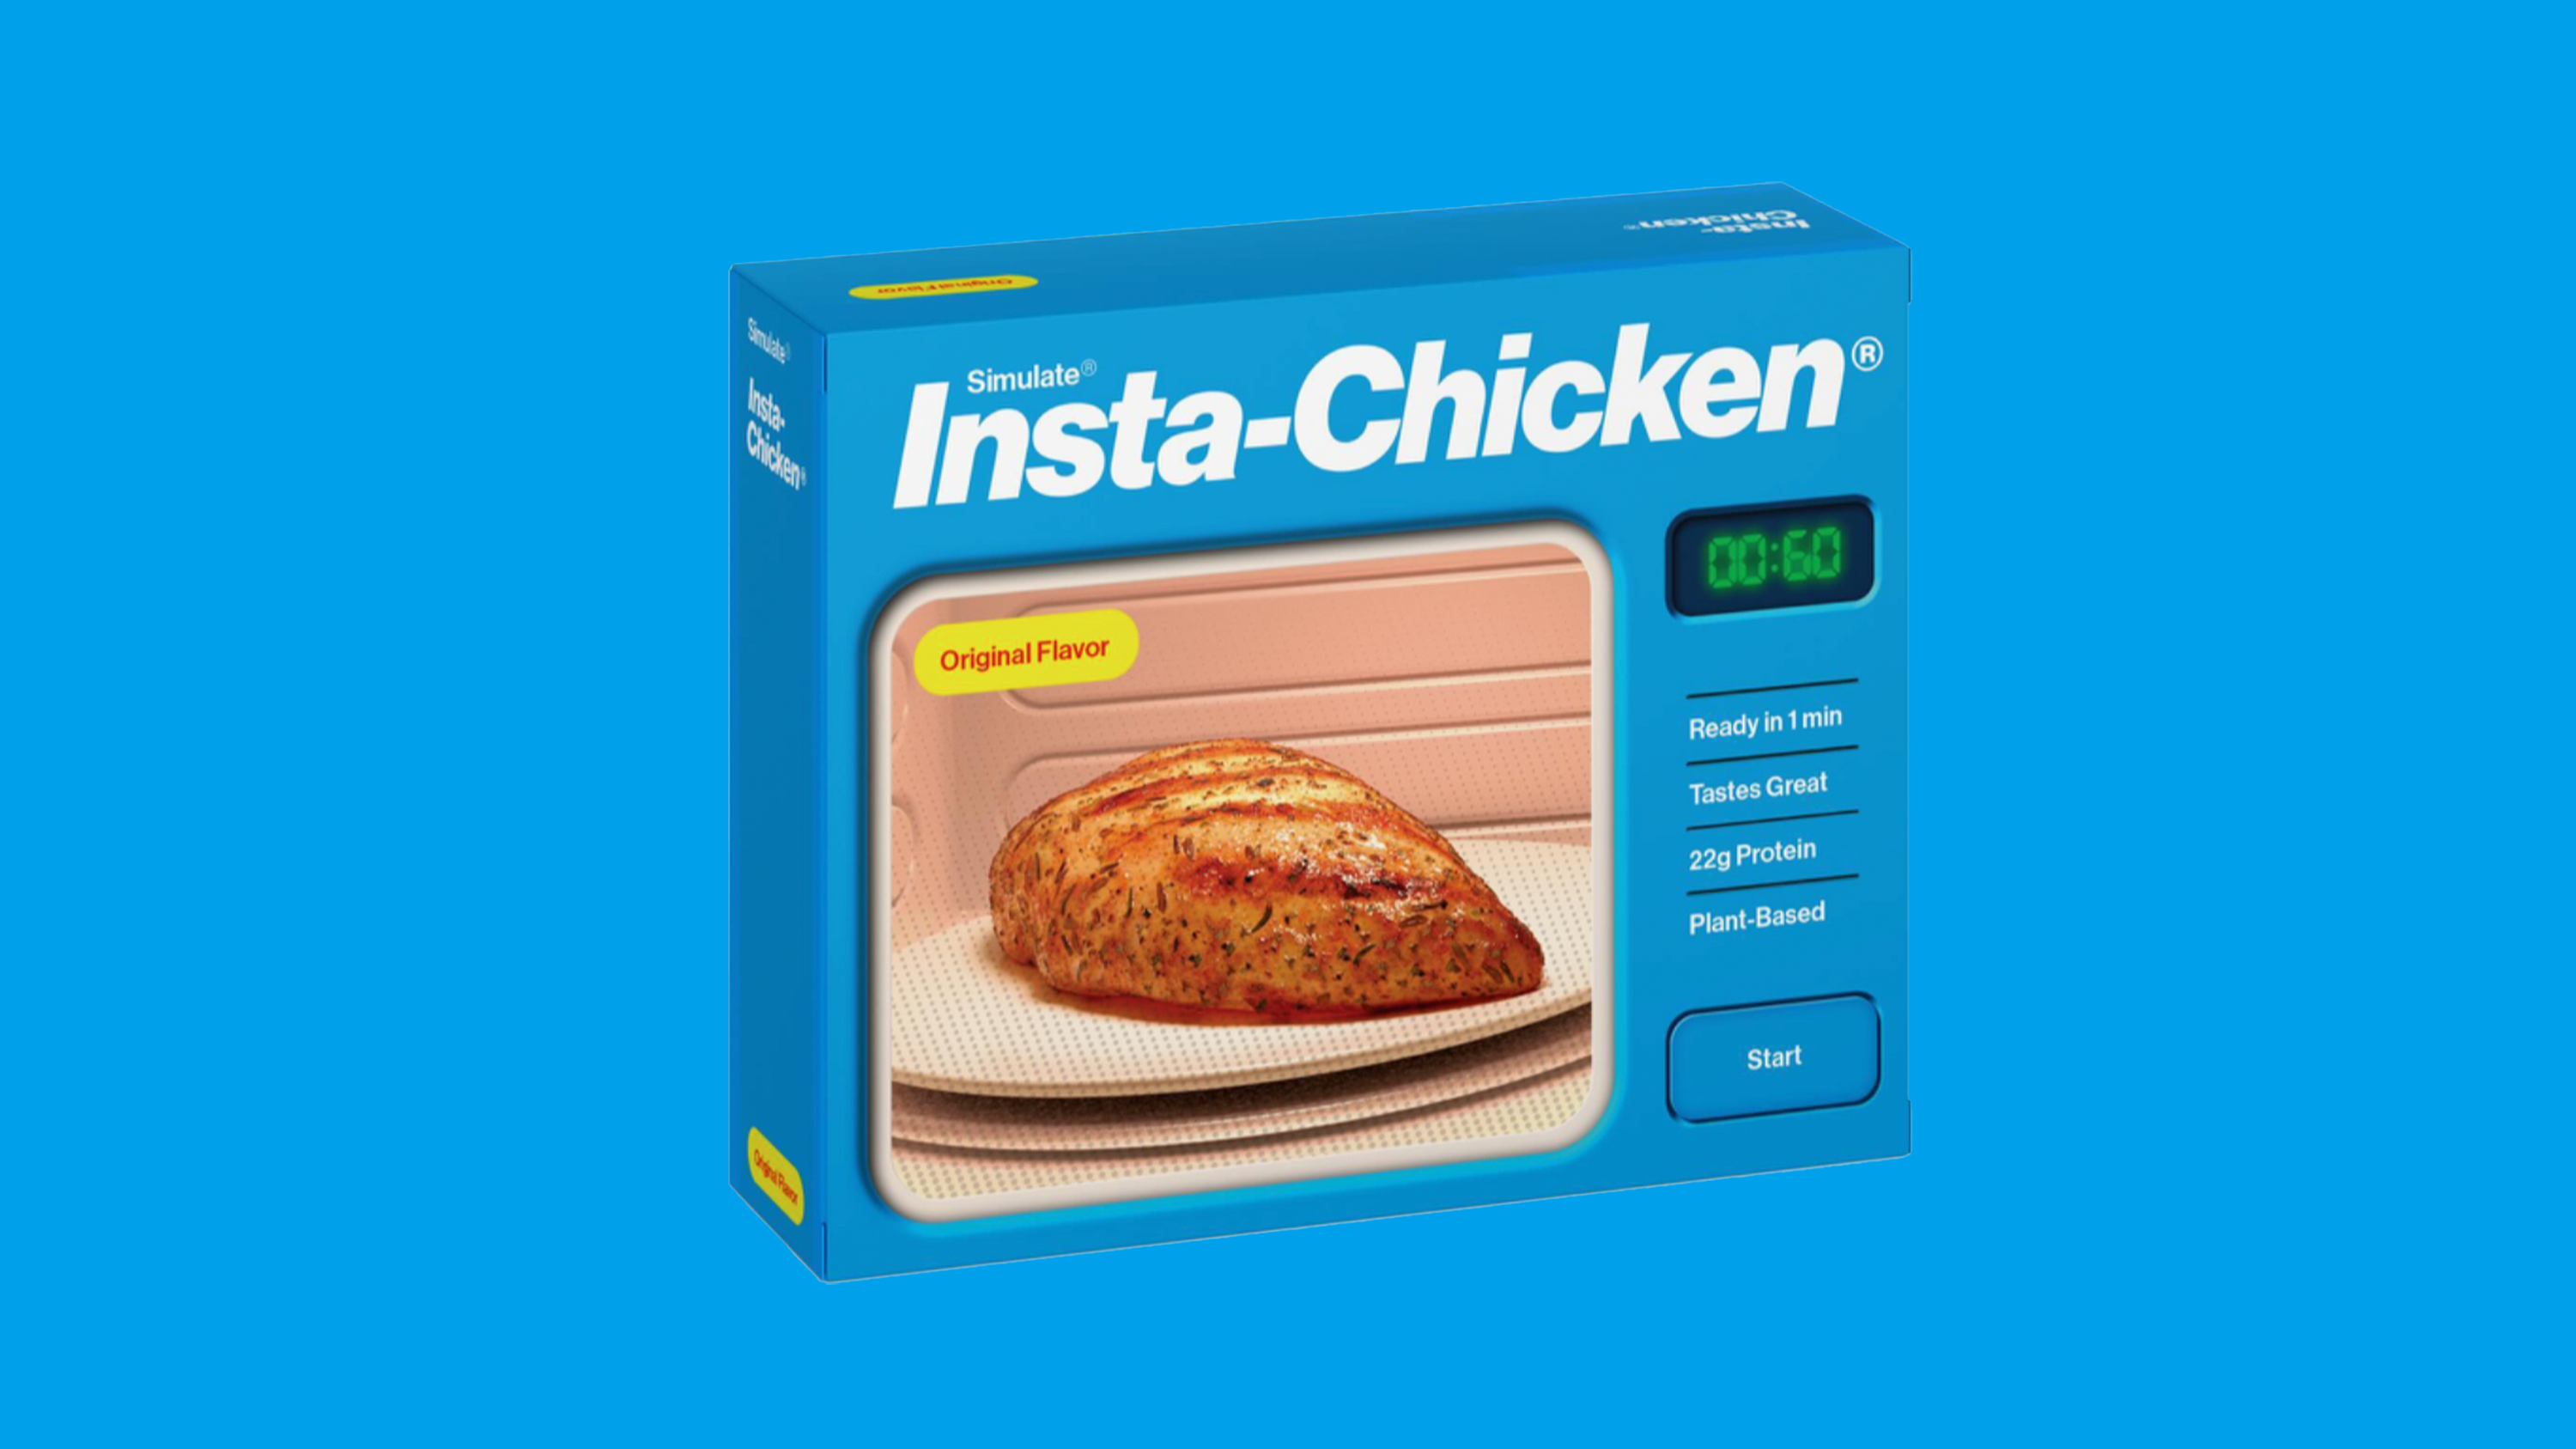 Does This Fake Chicken Breast Deserve Better Packaging?